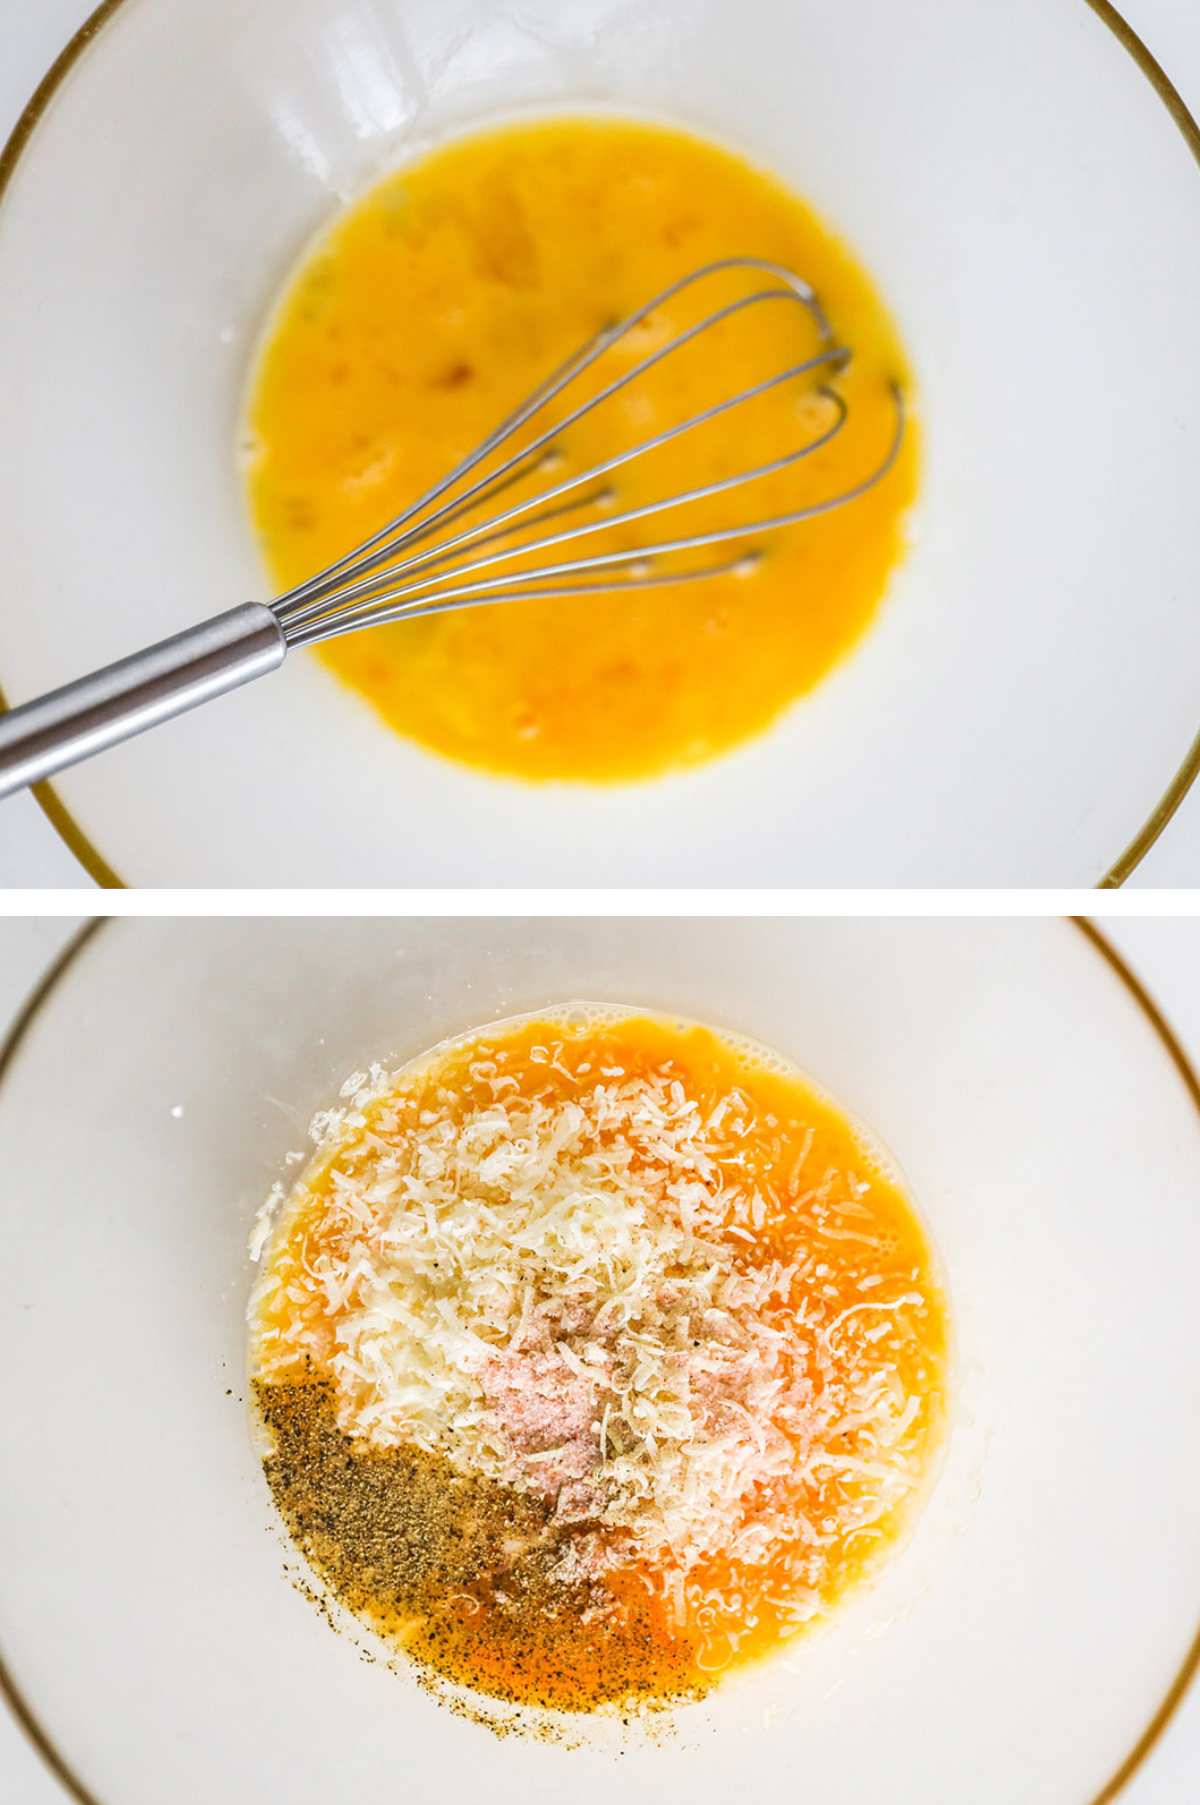 Two overhead images in one: 1. Eggs whisked in a white bowl. 2. Parmesan, salt, pepper, milk and garlic powder are added to whisked eggs. 